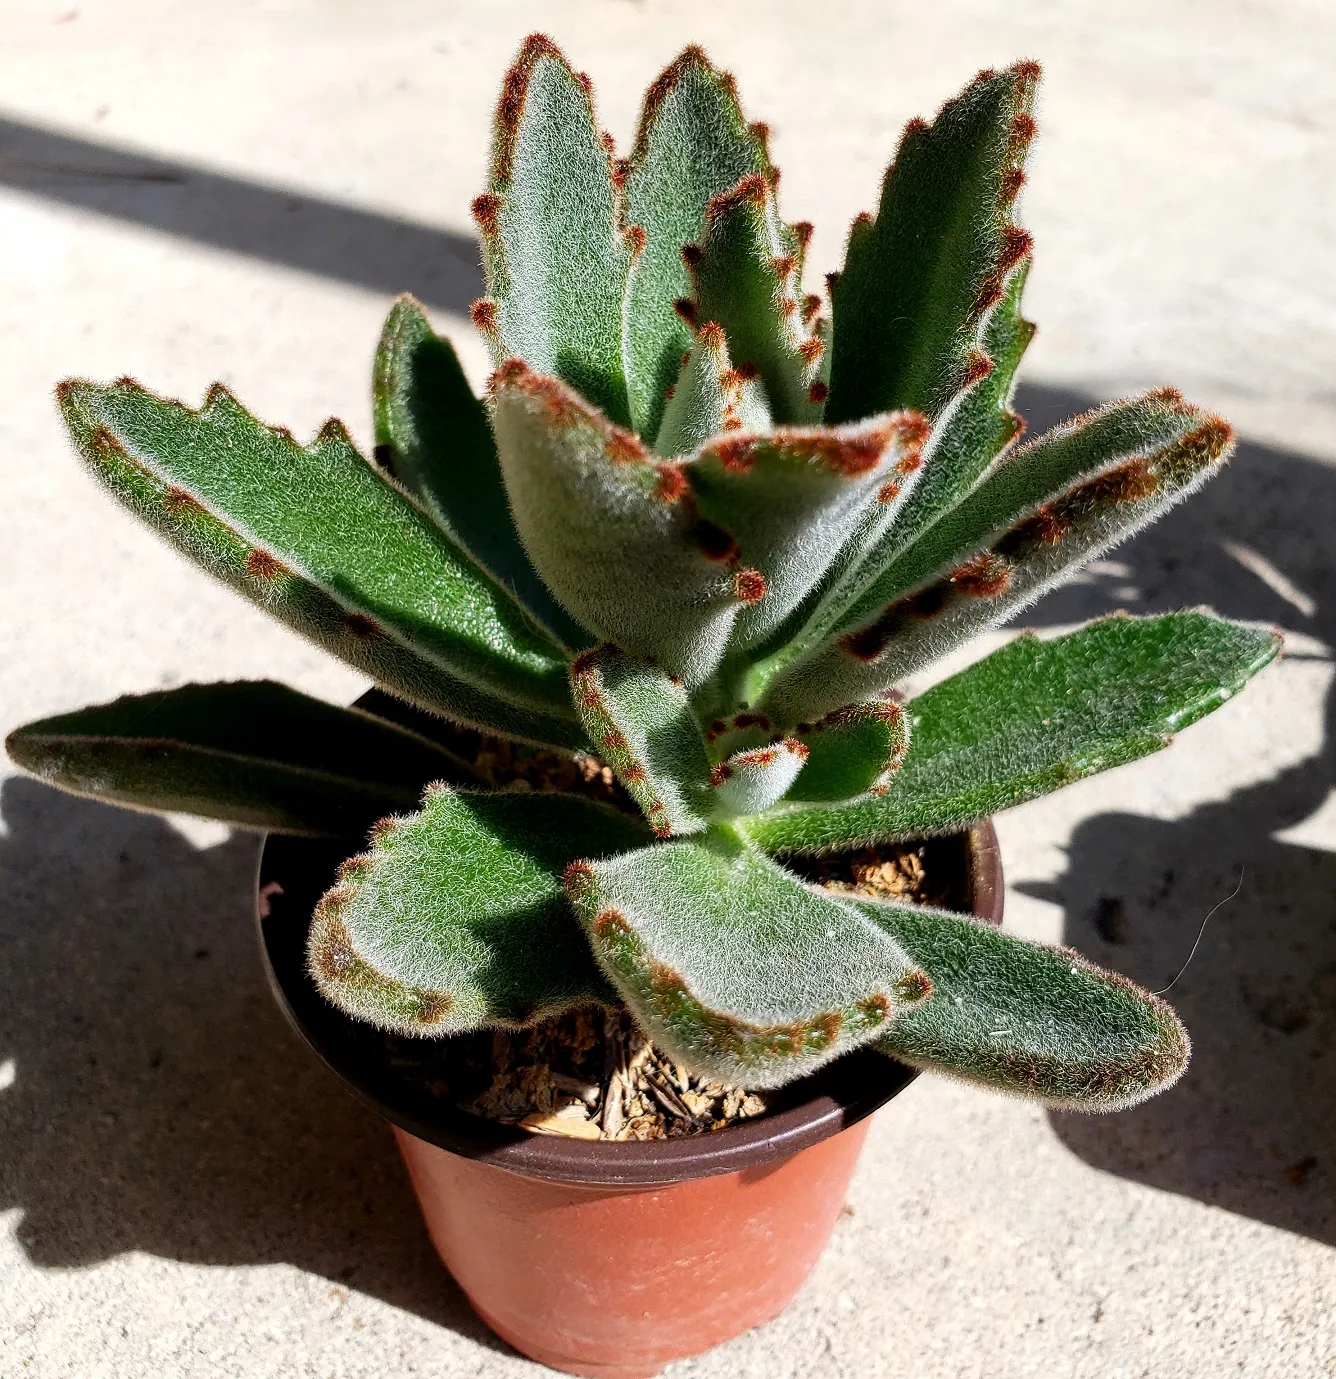 Panda Plant (Kalanchoe Tomentosa) Care And Growing Guide